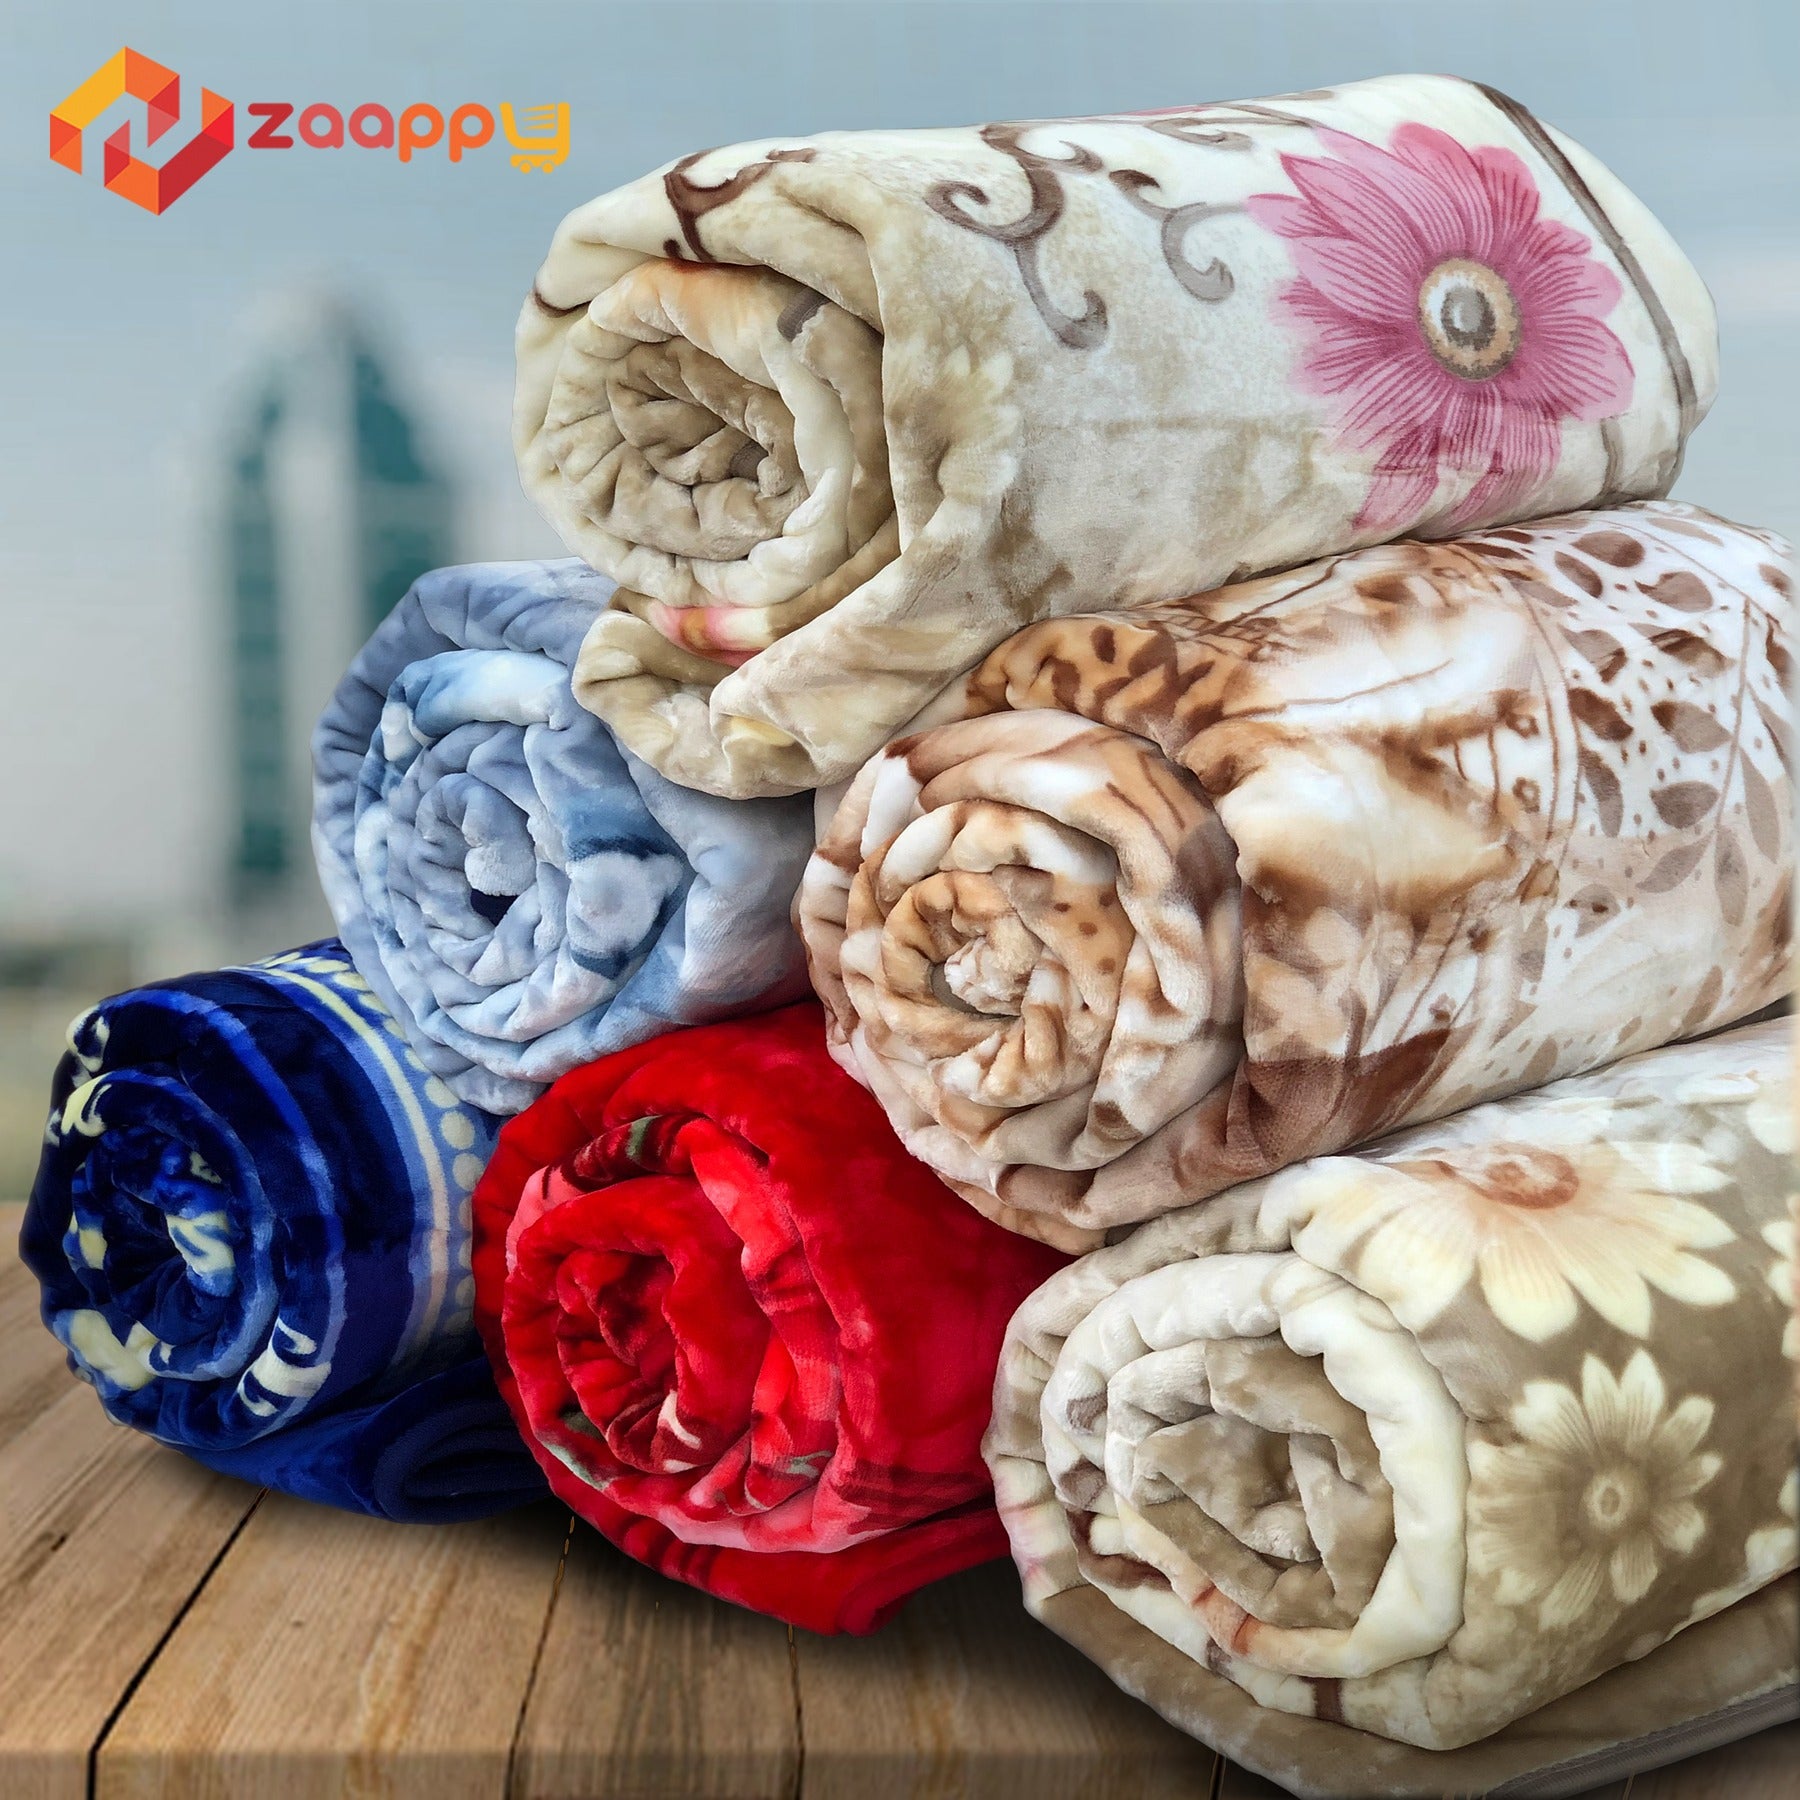 Fabric Printed Double Blanket For Heavy Winter | Donna Gold Zaappy